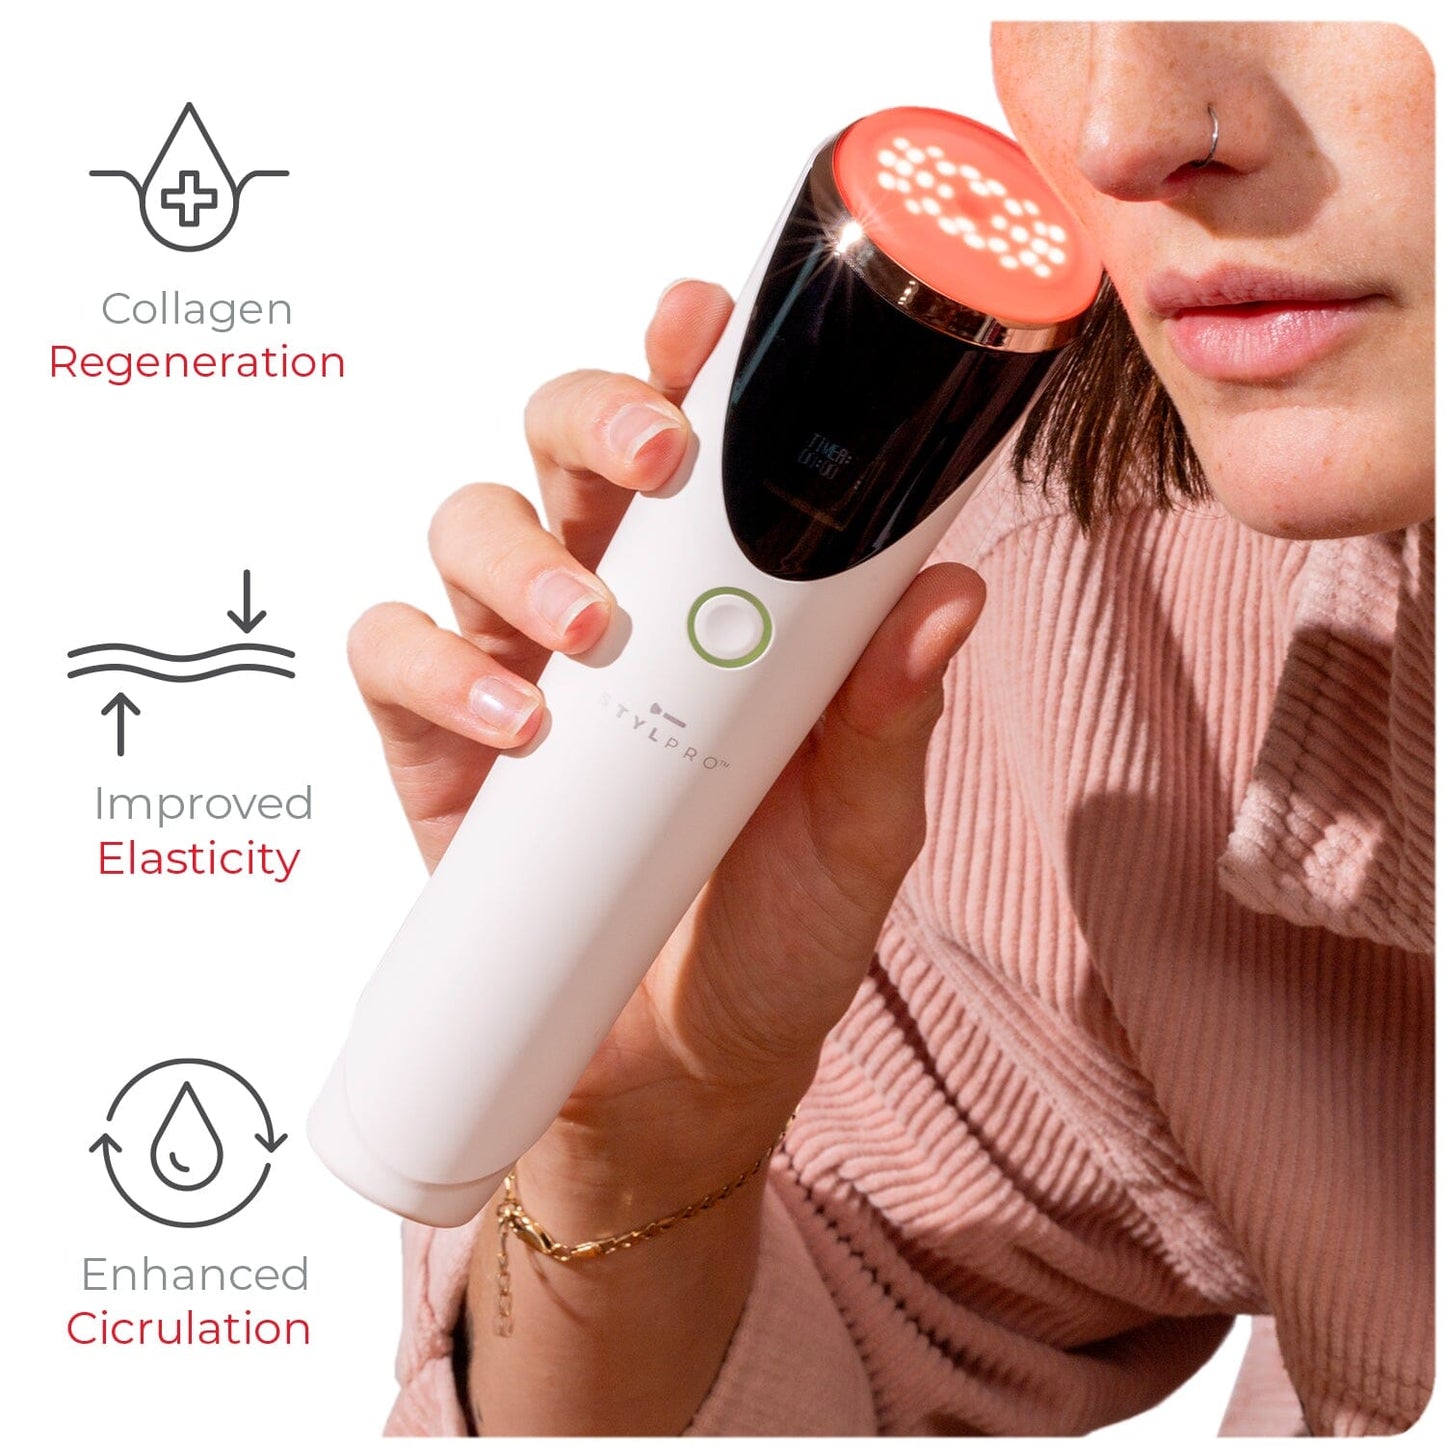 STYLPRO Pure Red LED Light Therapy Facial Device